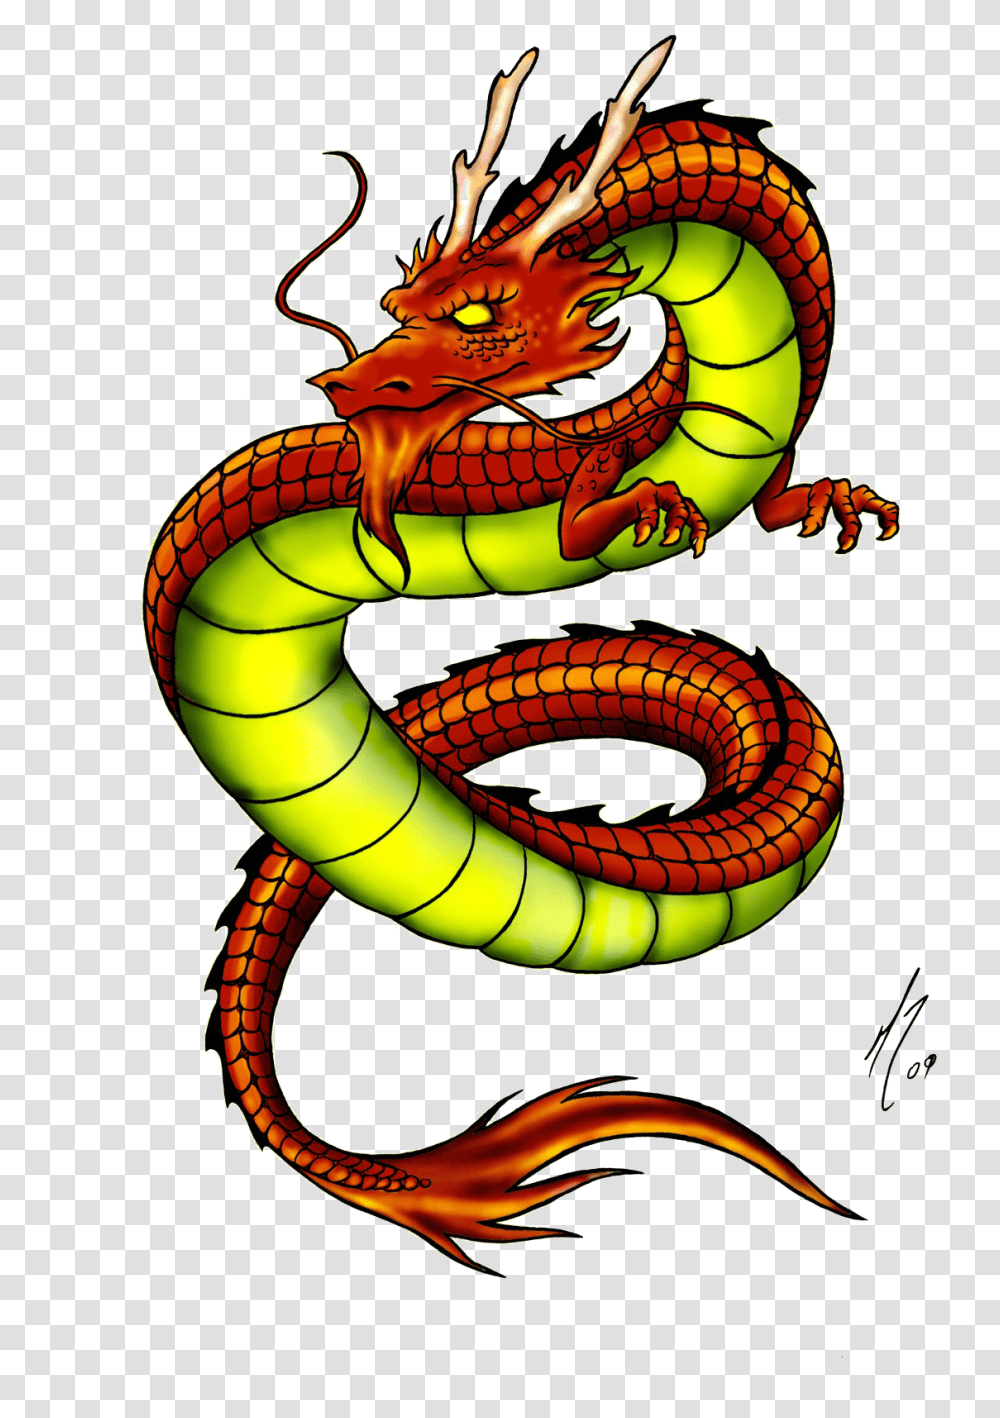 Colourful Dragon Tattoo Designs, Reptile, Animal, Snake Transparent Png